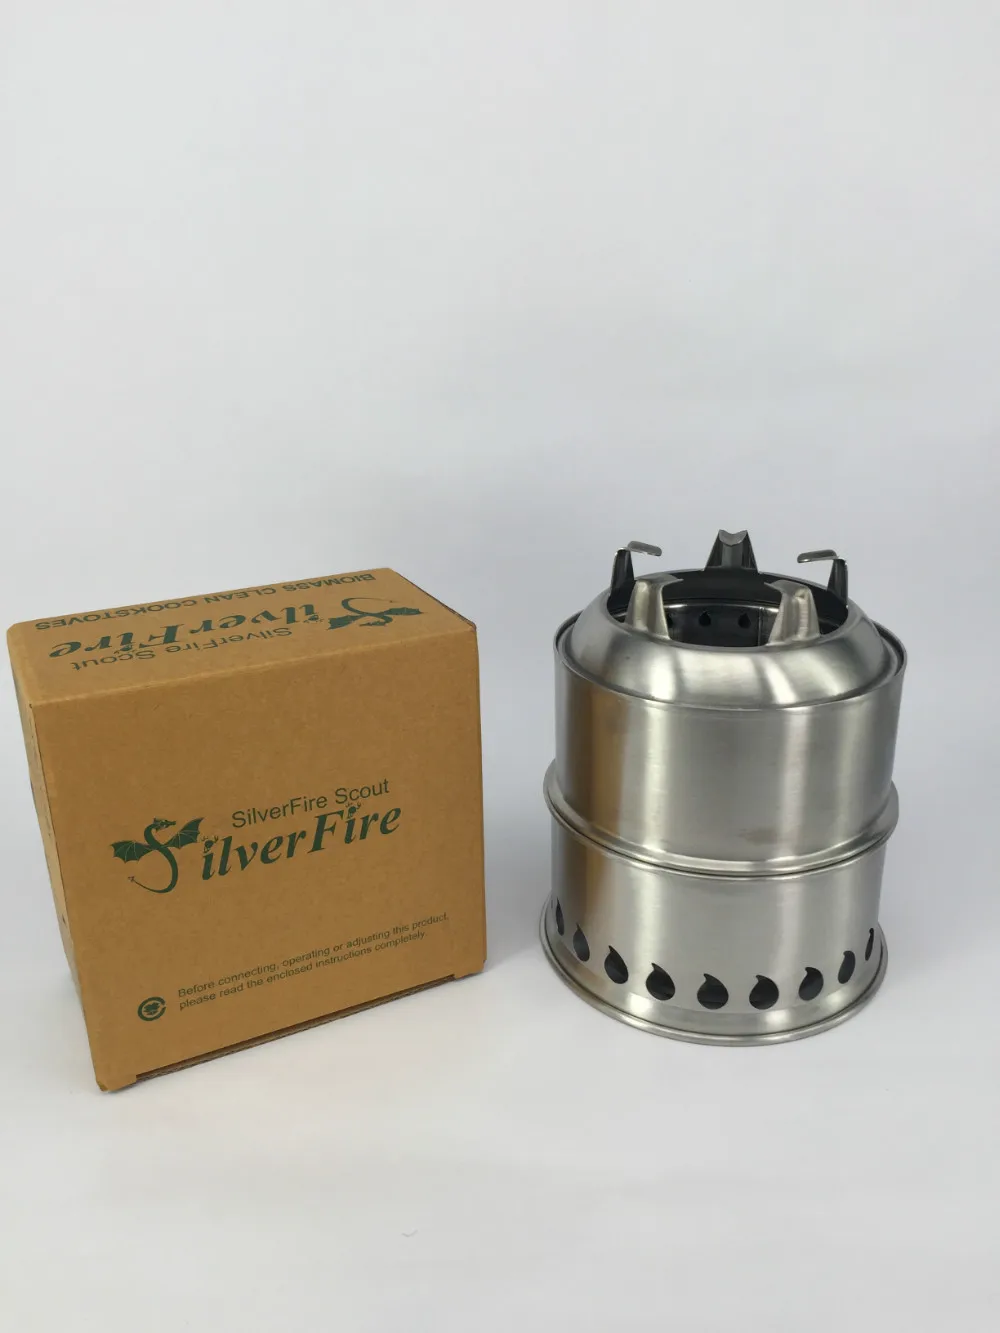 silver fire scout biomass clean cookestoves winwinter fishing bio fuel stainless steel stove  small gragon